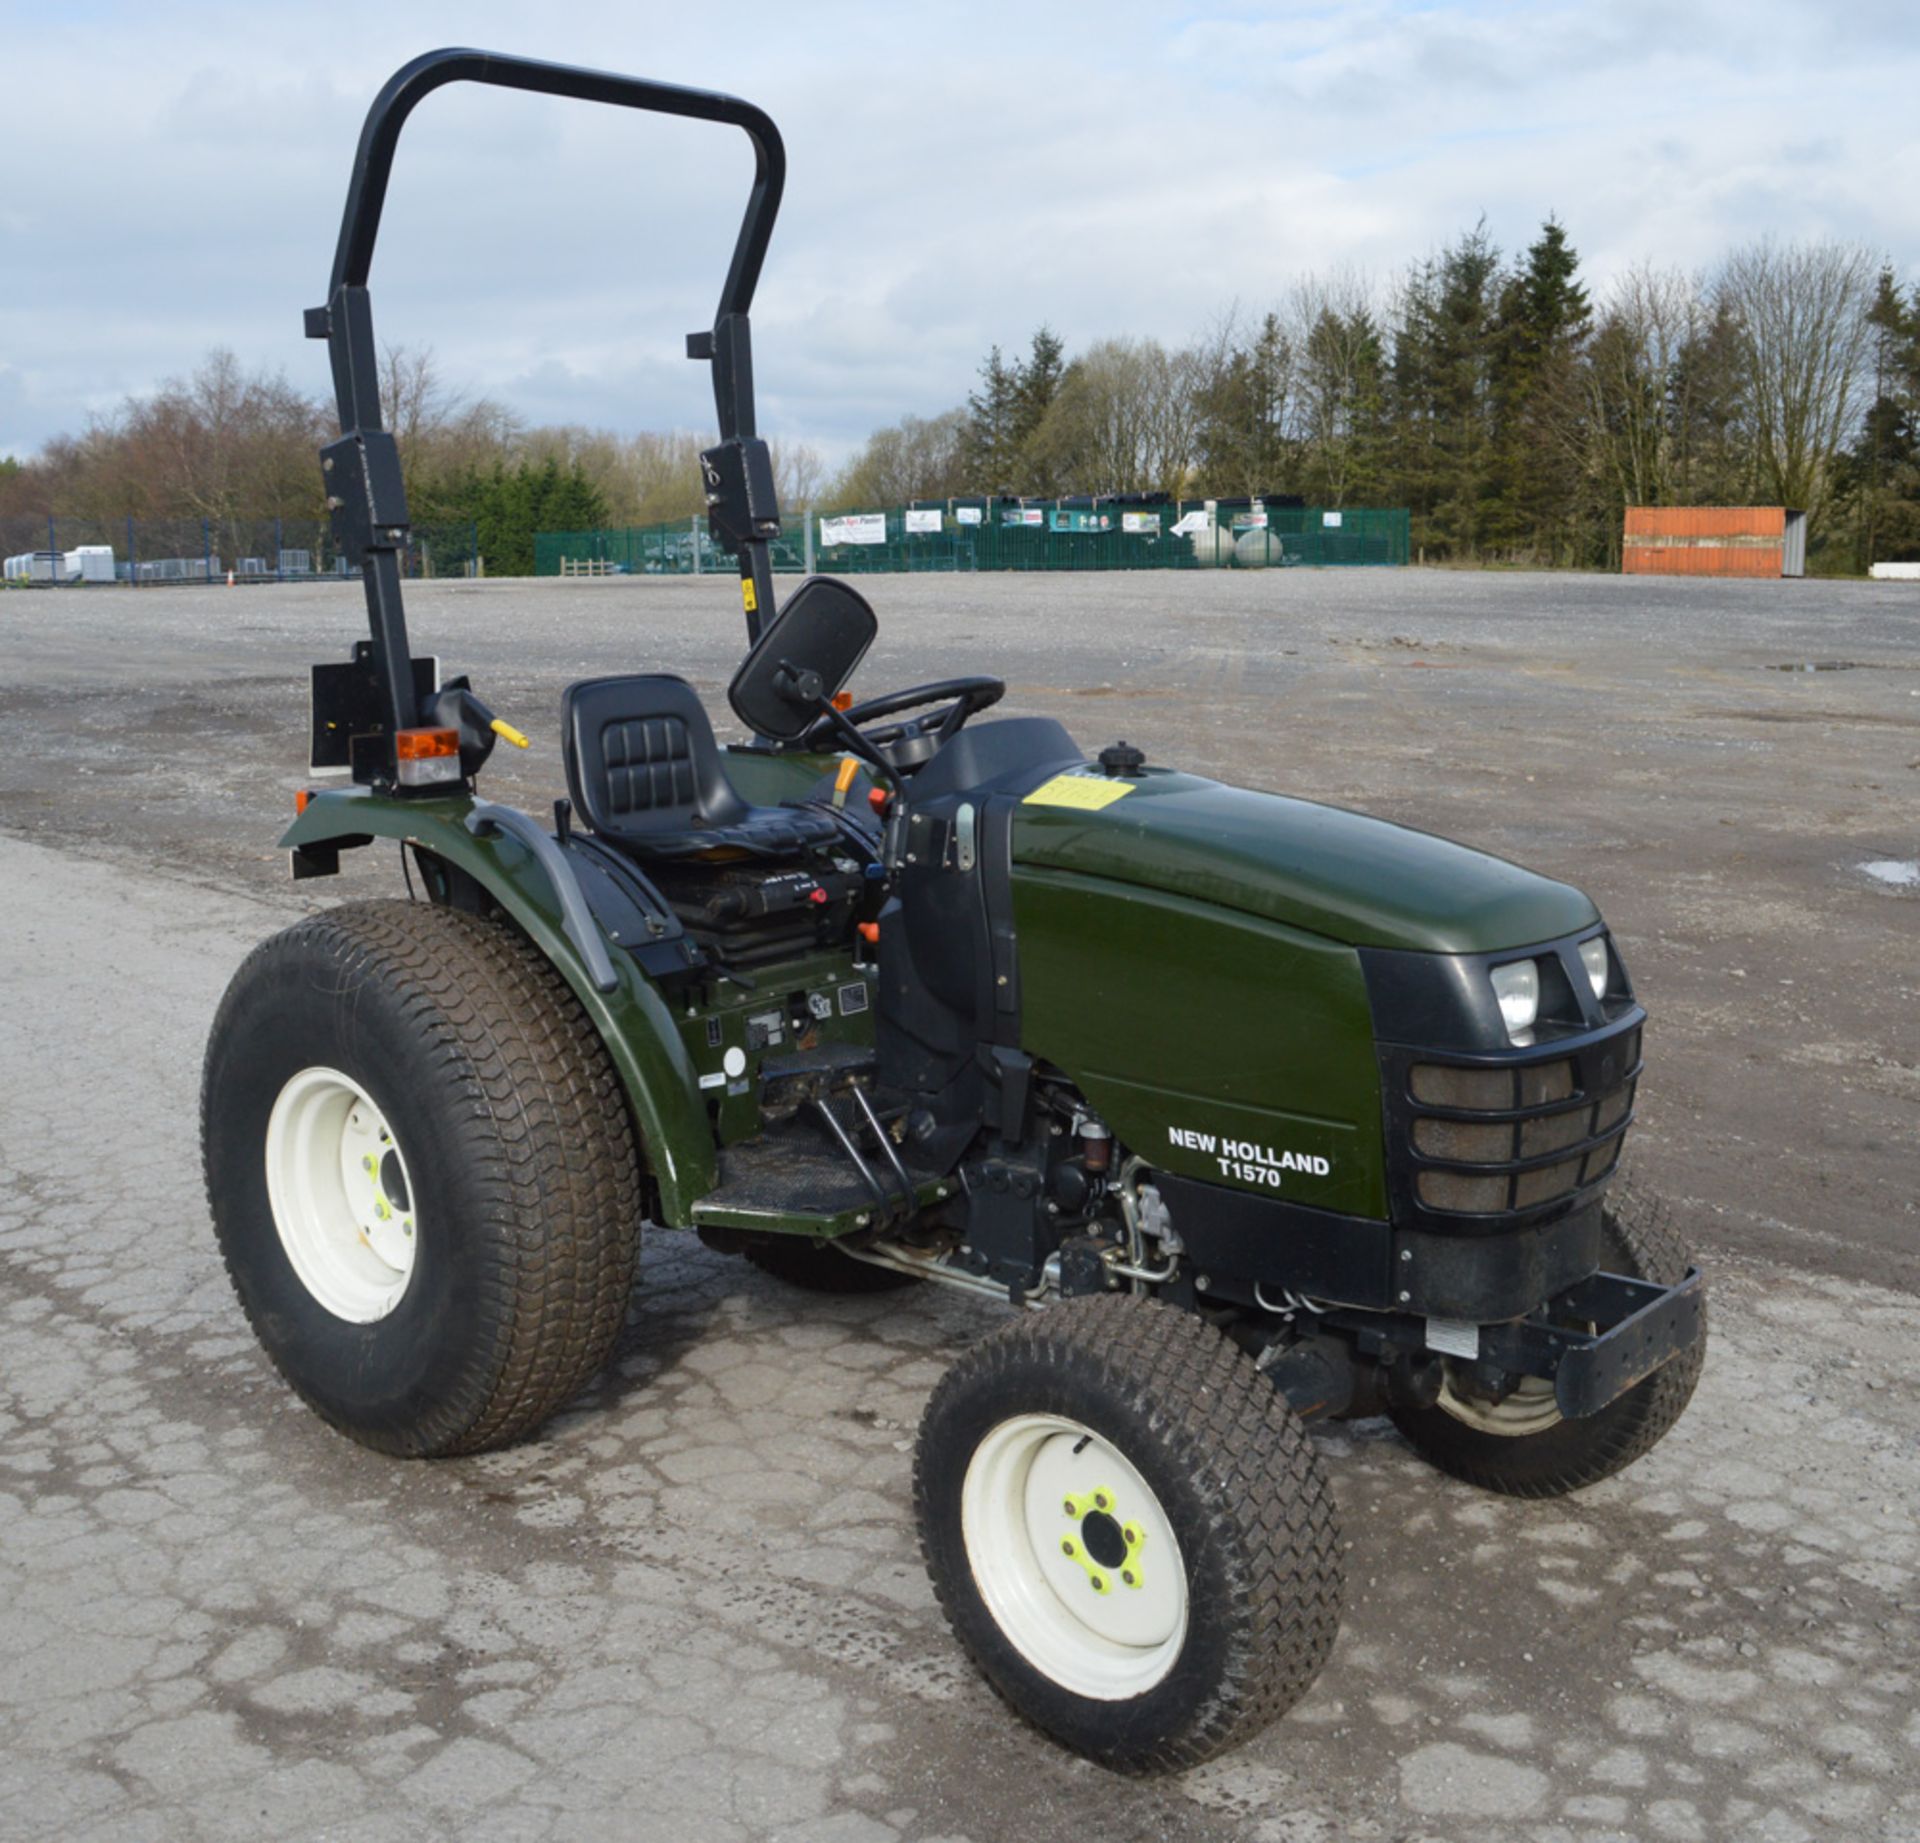 New Holland T1570 Hydro 4wd tractor (Ex Royal Parks) Year: 2011 S/N: ZANDT9001 Recorded Hours: